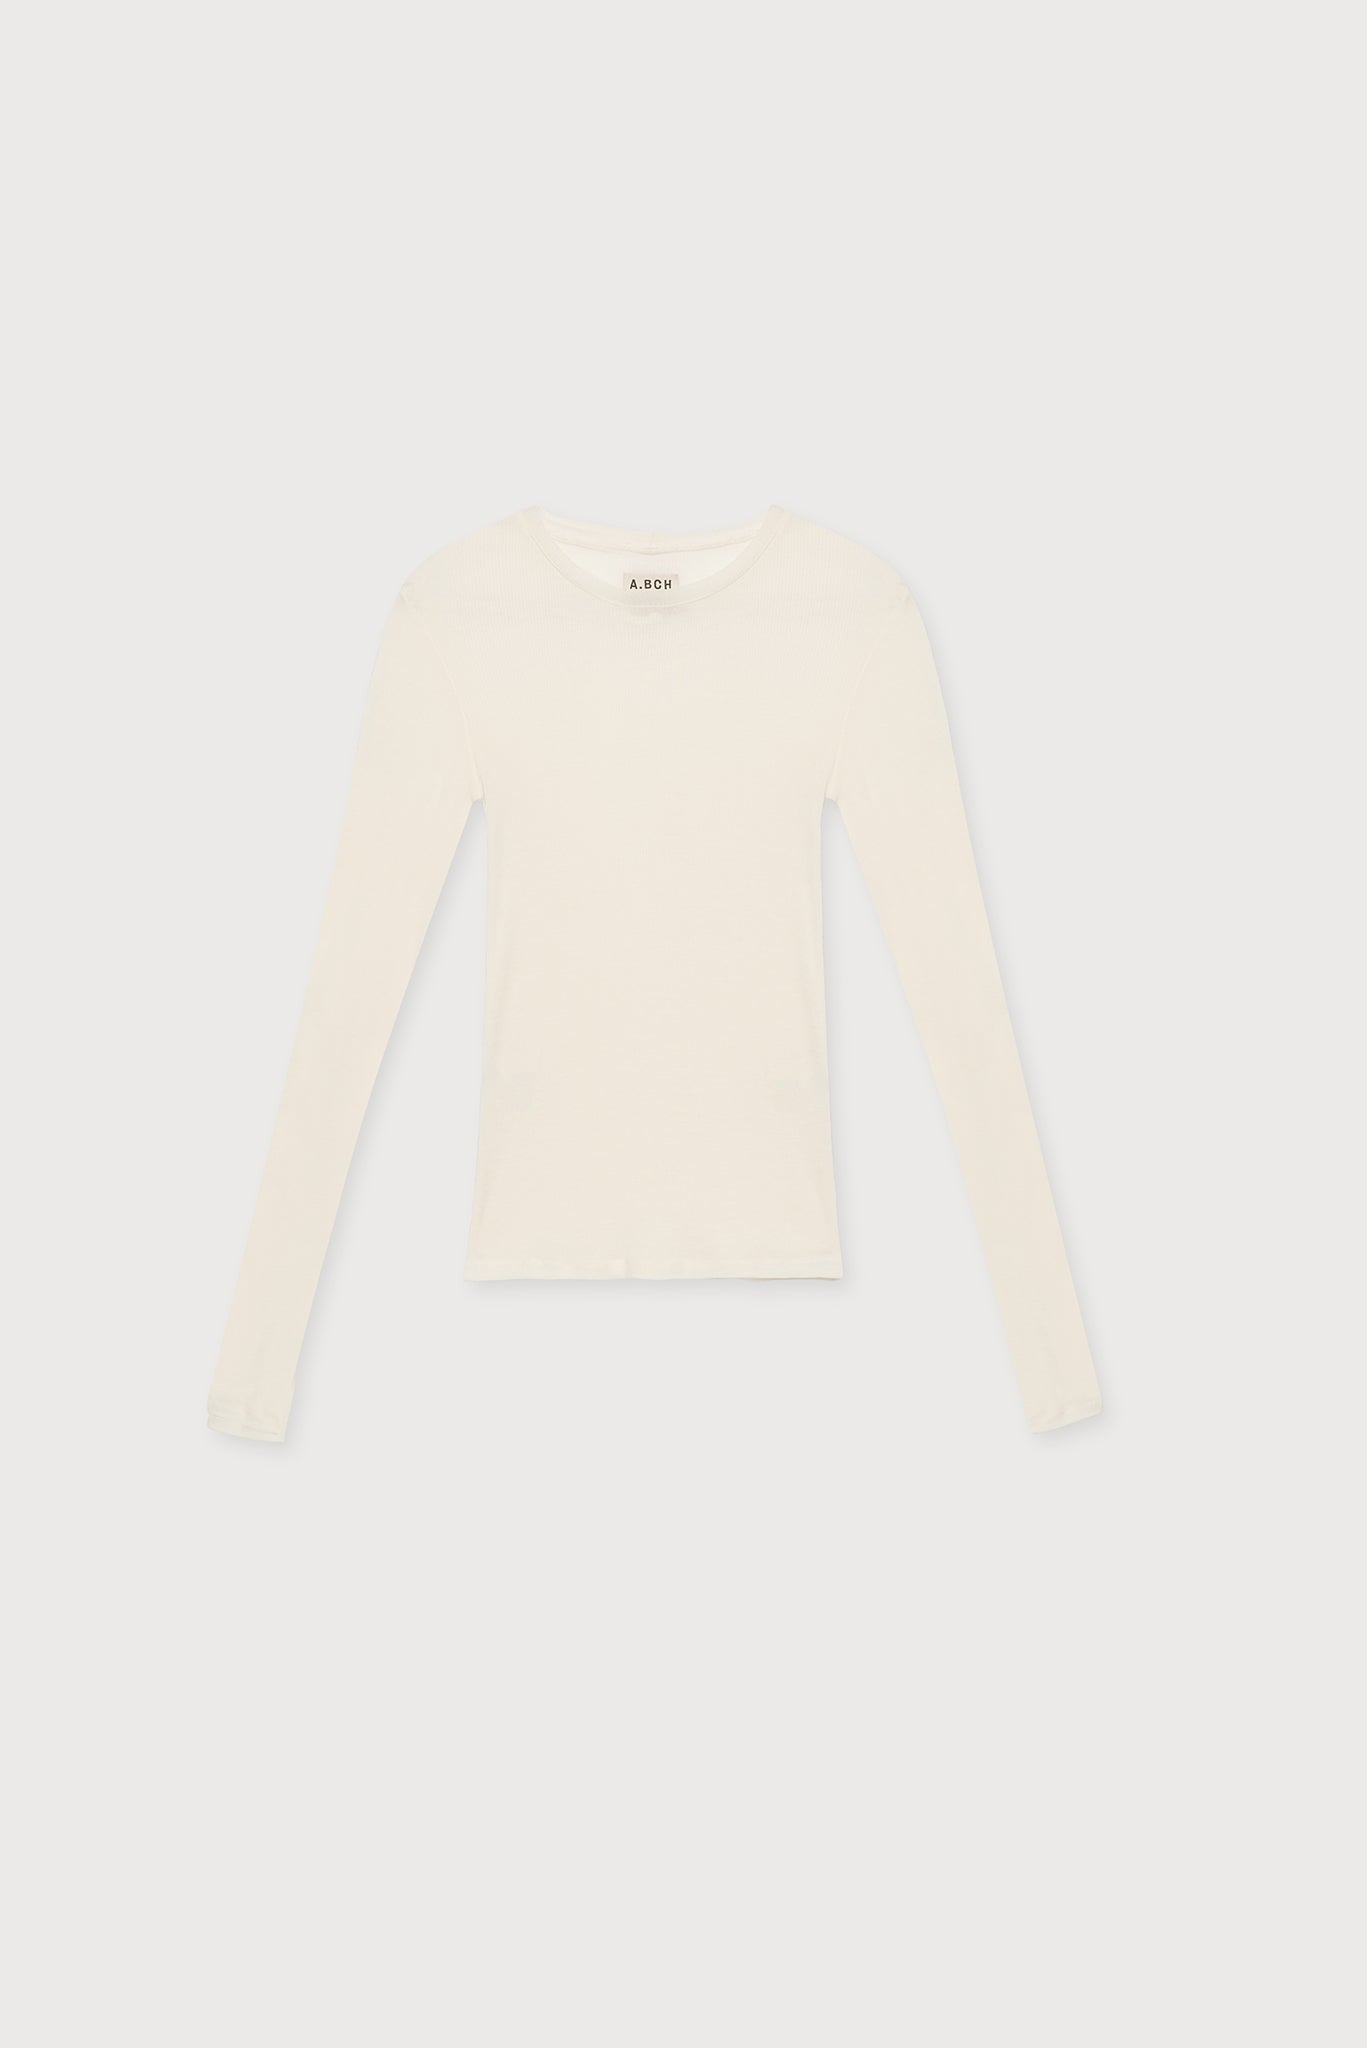 A.BCH A.34 Ivory Long Sleeve Thermal T-Shirt in Australian Merino